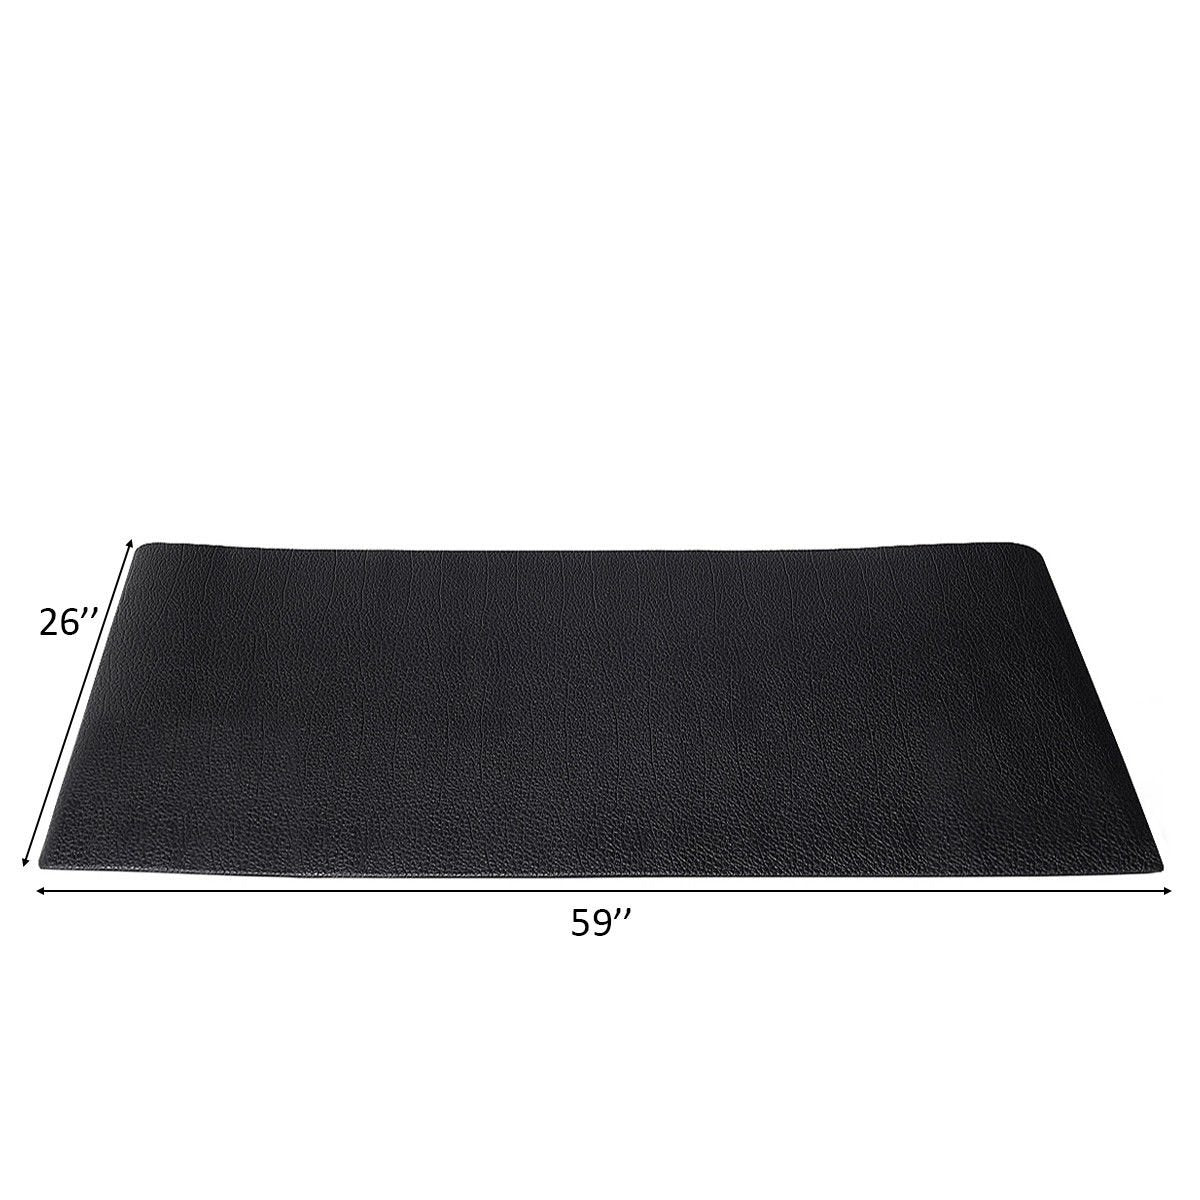 47/59/78 Inch Long Thicken Equipment Mat for Home and Gym Use-59 x 26 x 0.2 inches - Gallery Canada